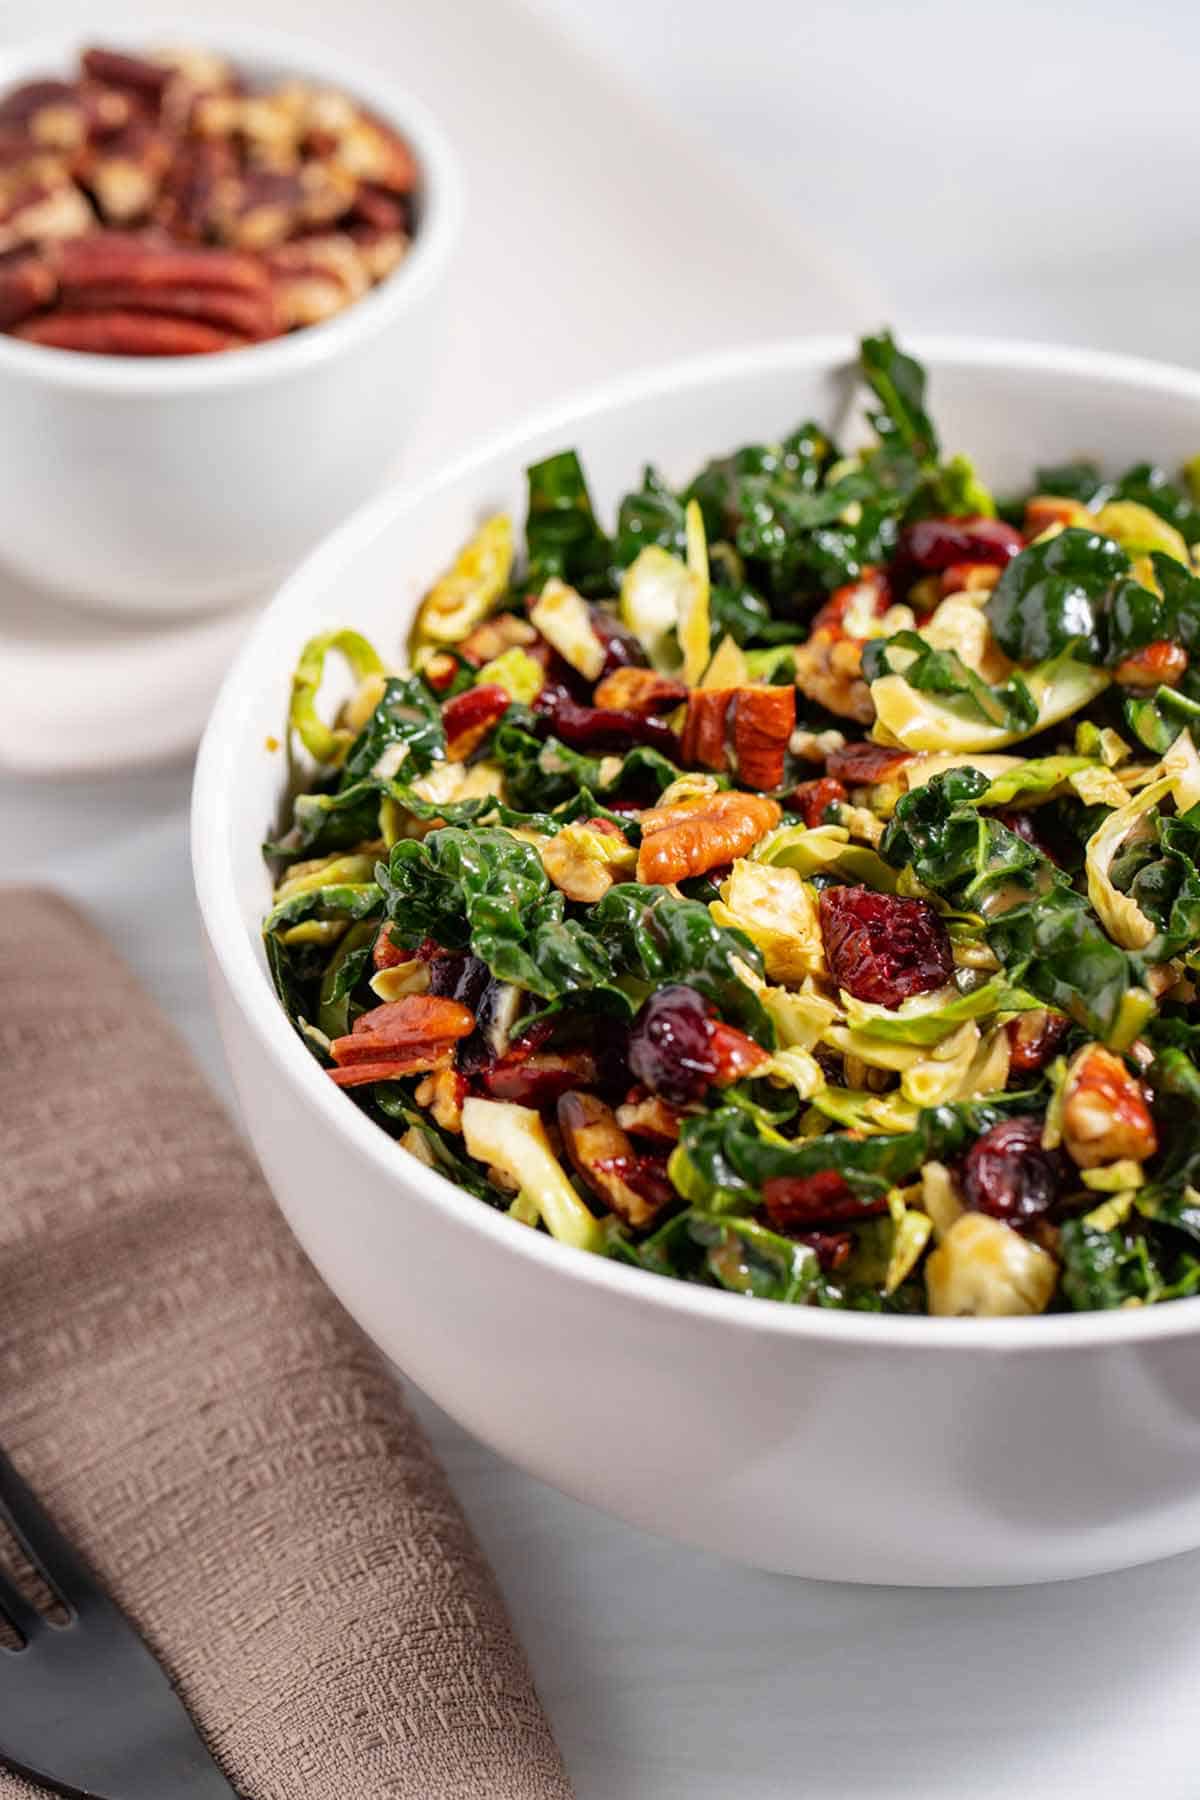 Bowl of kale and Brussels sprouts salad with chopped pecans and dried cranberries.